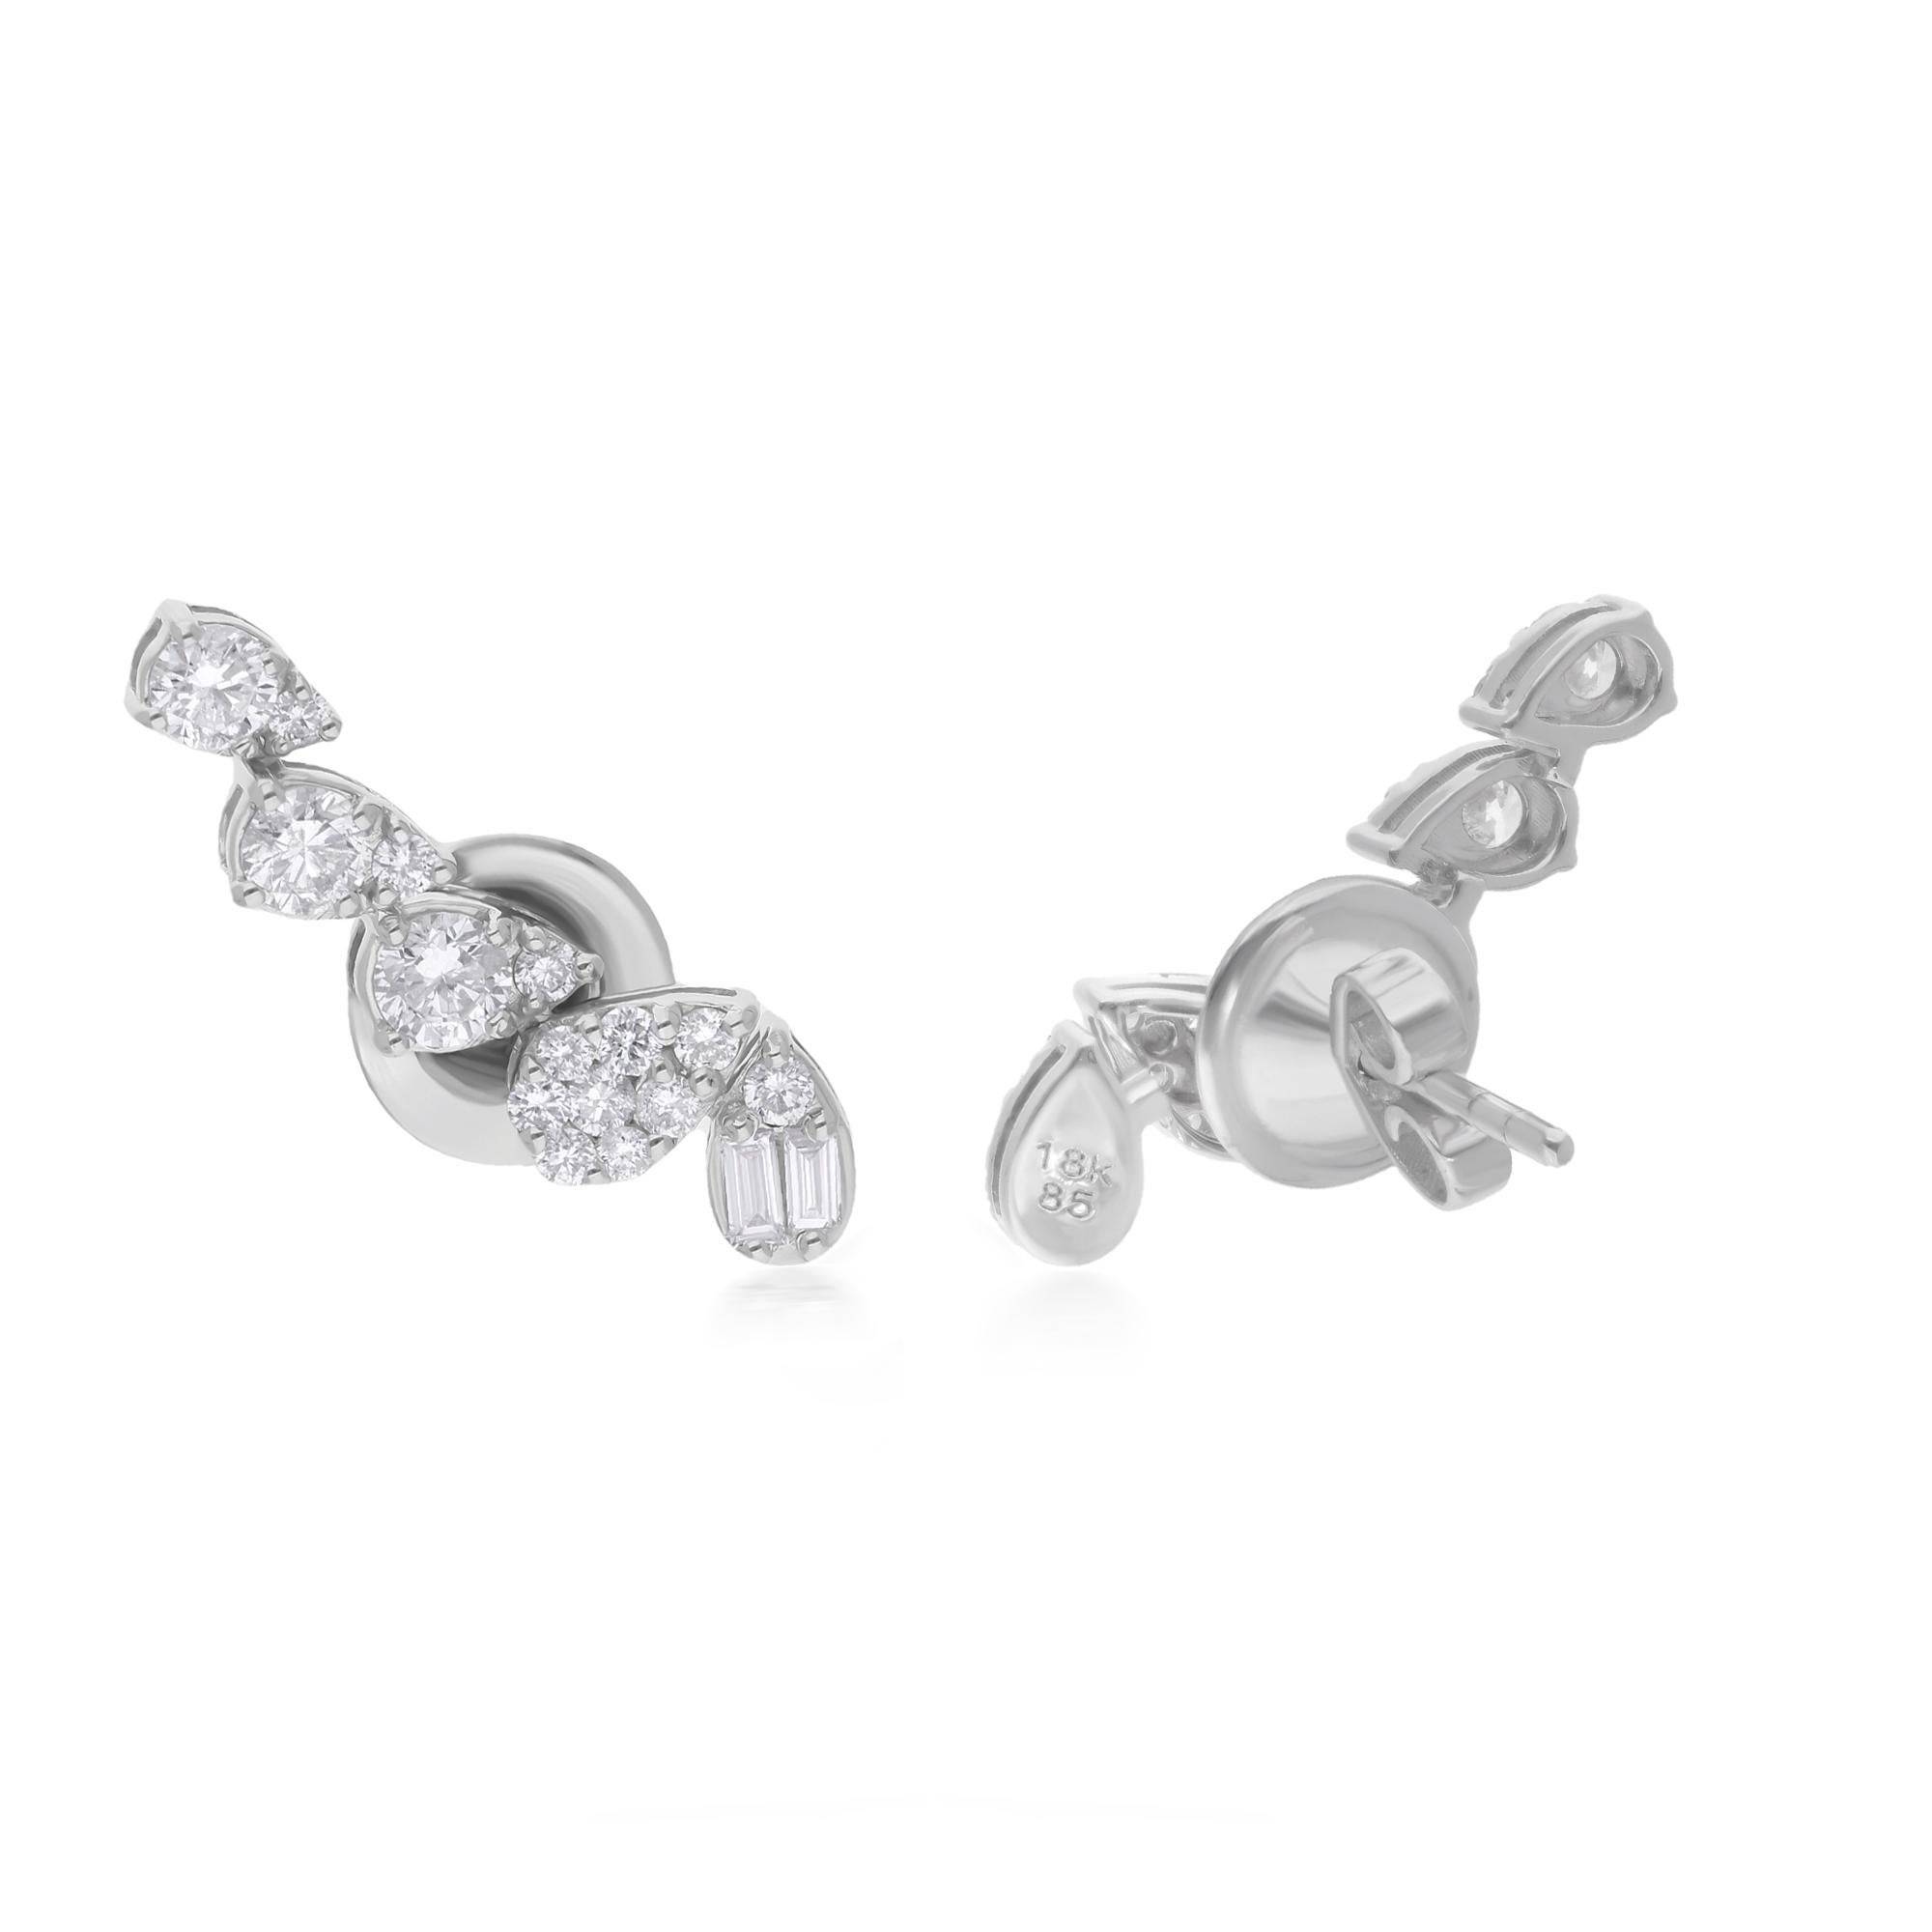 These stunning diamond climber earrings are a masterpiece of elegance and sophistication. Crafted from luxurious 14 karat white gold, they exude a timeless allure that seamlessly complements any ensemble, from casual chic to formal glamour.

Item